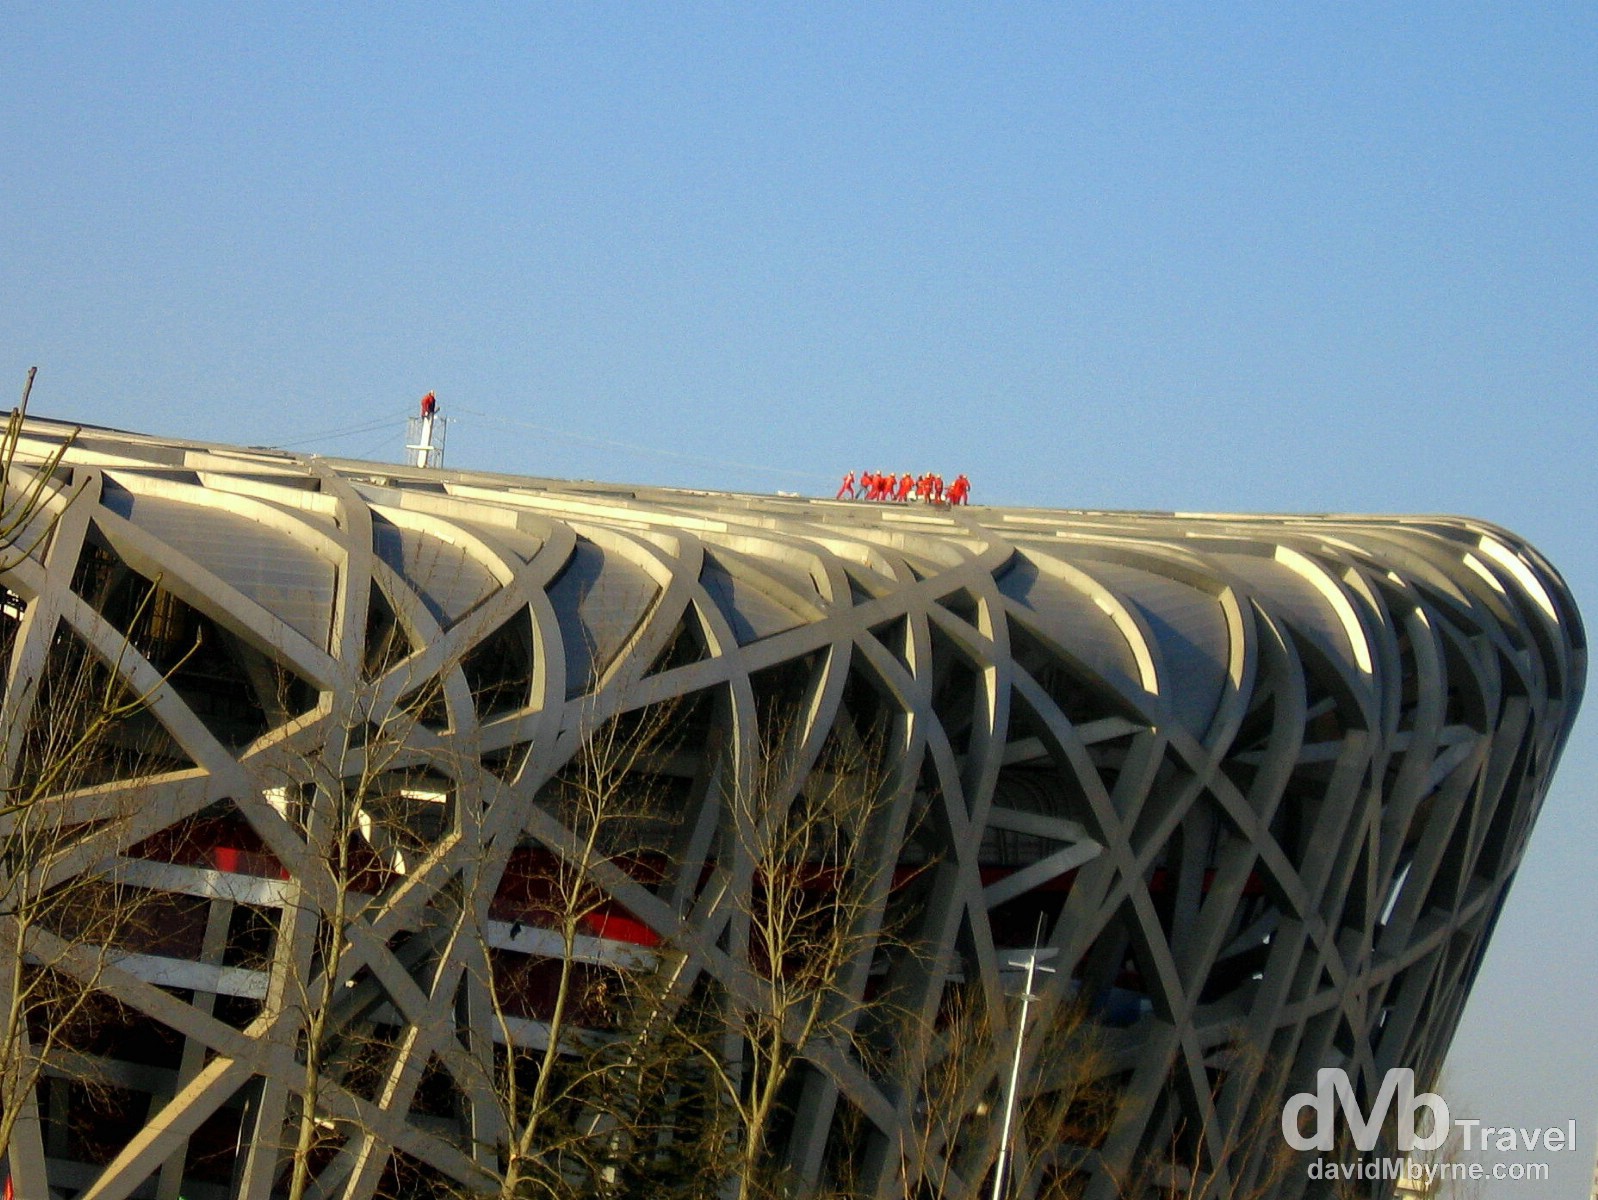 Workers on the roof of the Olympic Stadium, aka The Bird's Nest, in Beijing Olympic Park, Beijing, China. February 16th, 2008.